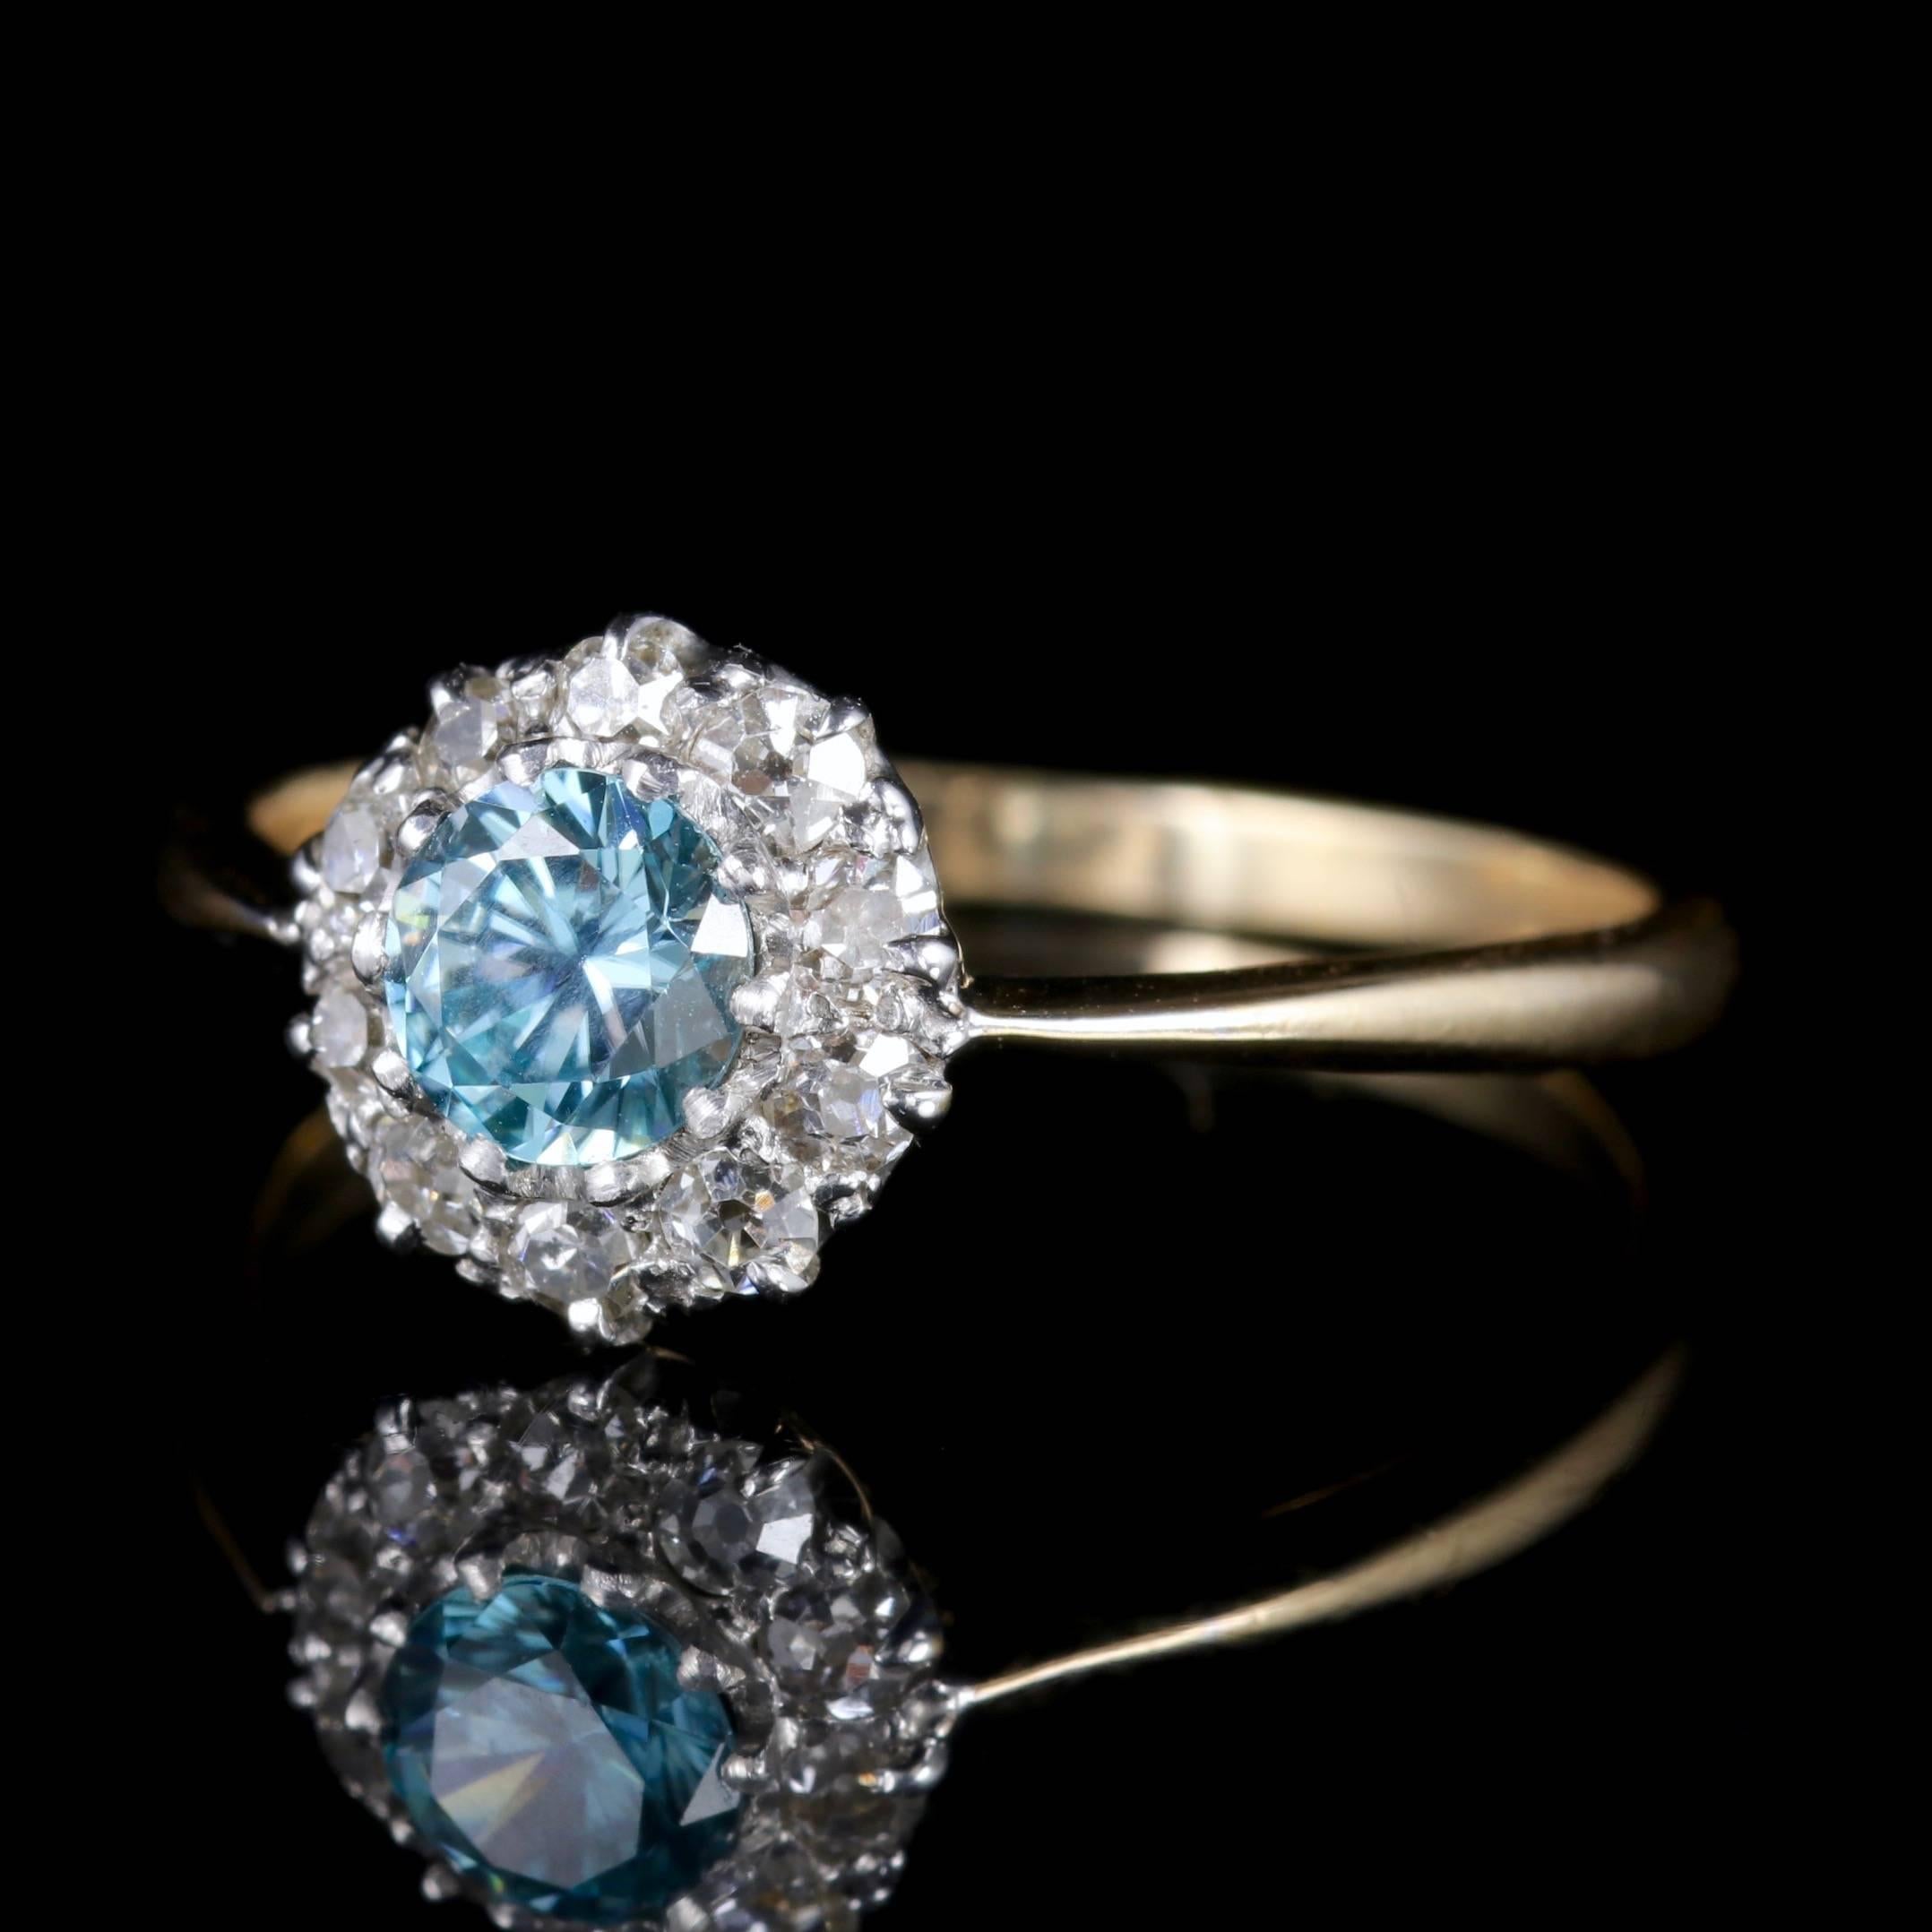 This wonderful antique Blue Zircon and Diamond cluster ring is Edwardian Circa 1915.

The Blue Zircon is approx. 60 points surrounded by Old Cut Diamonds which are SI 1 H Clarity.

In the middle ages the Blue Zircon was said to bring prosperity and